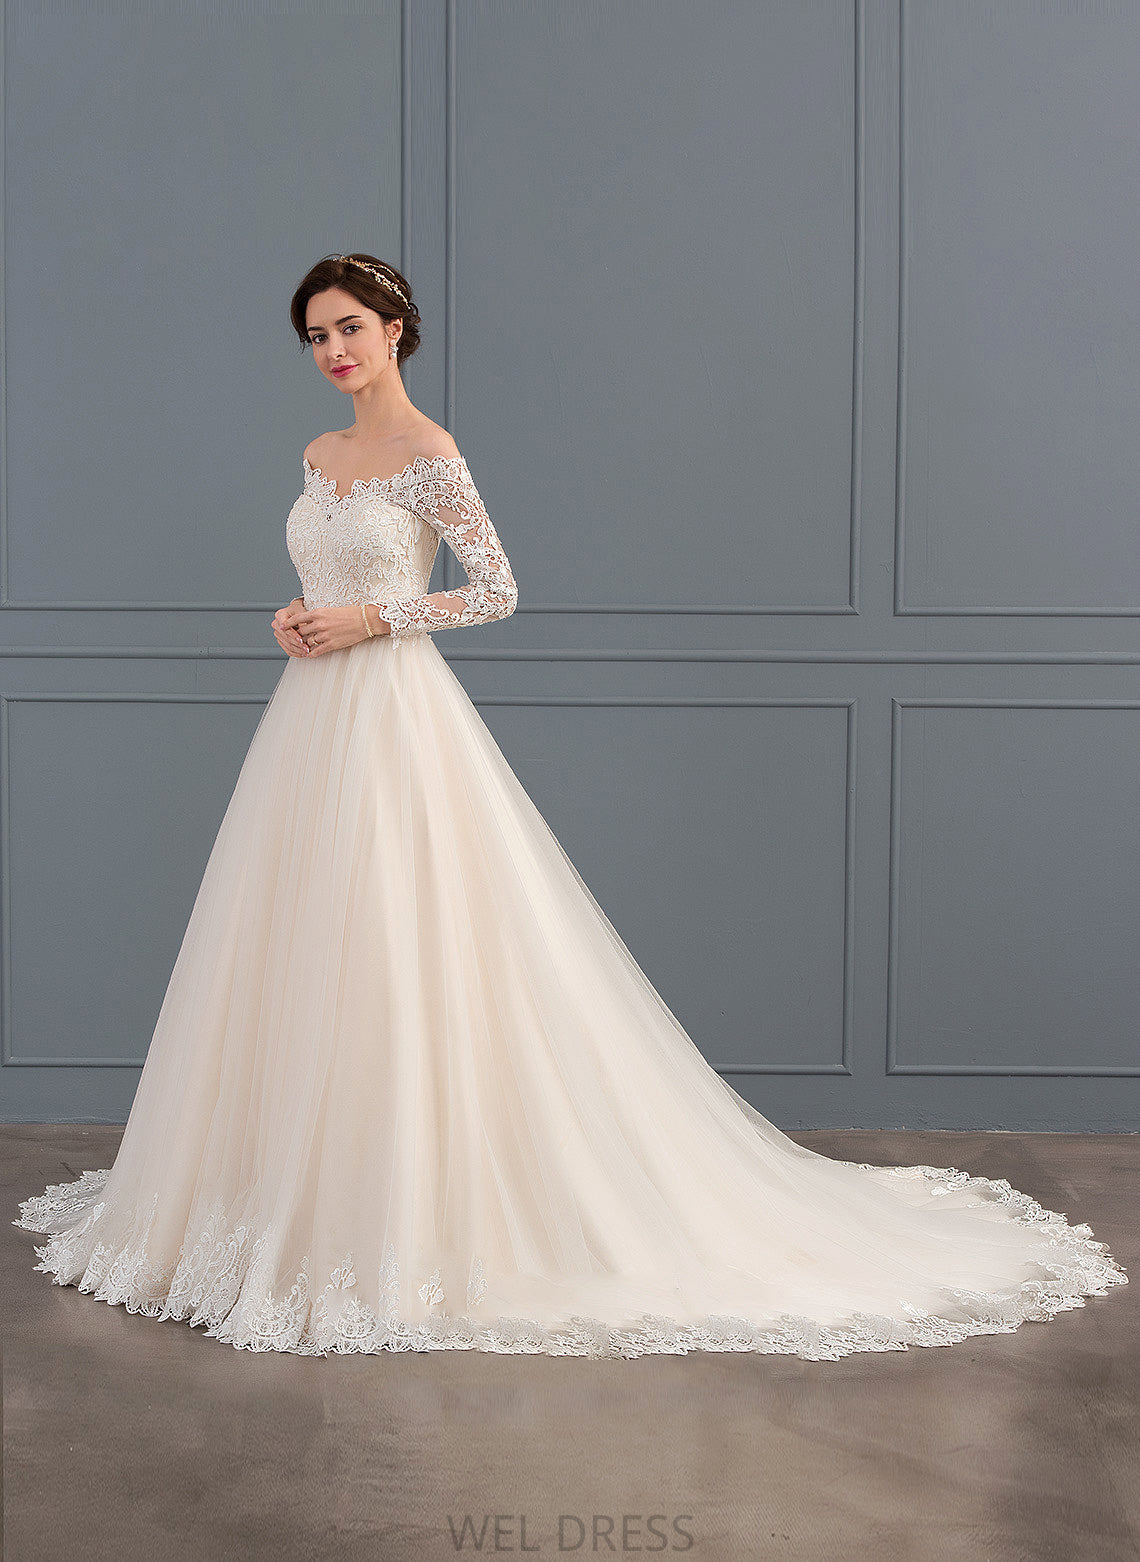 Train Dress Off-the-Shoulder Tulle Lace Wedding Dresses Chapel Ball-Gown/Princess Wedding Natalie